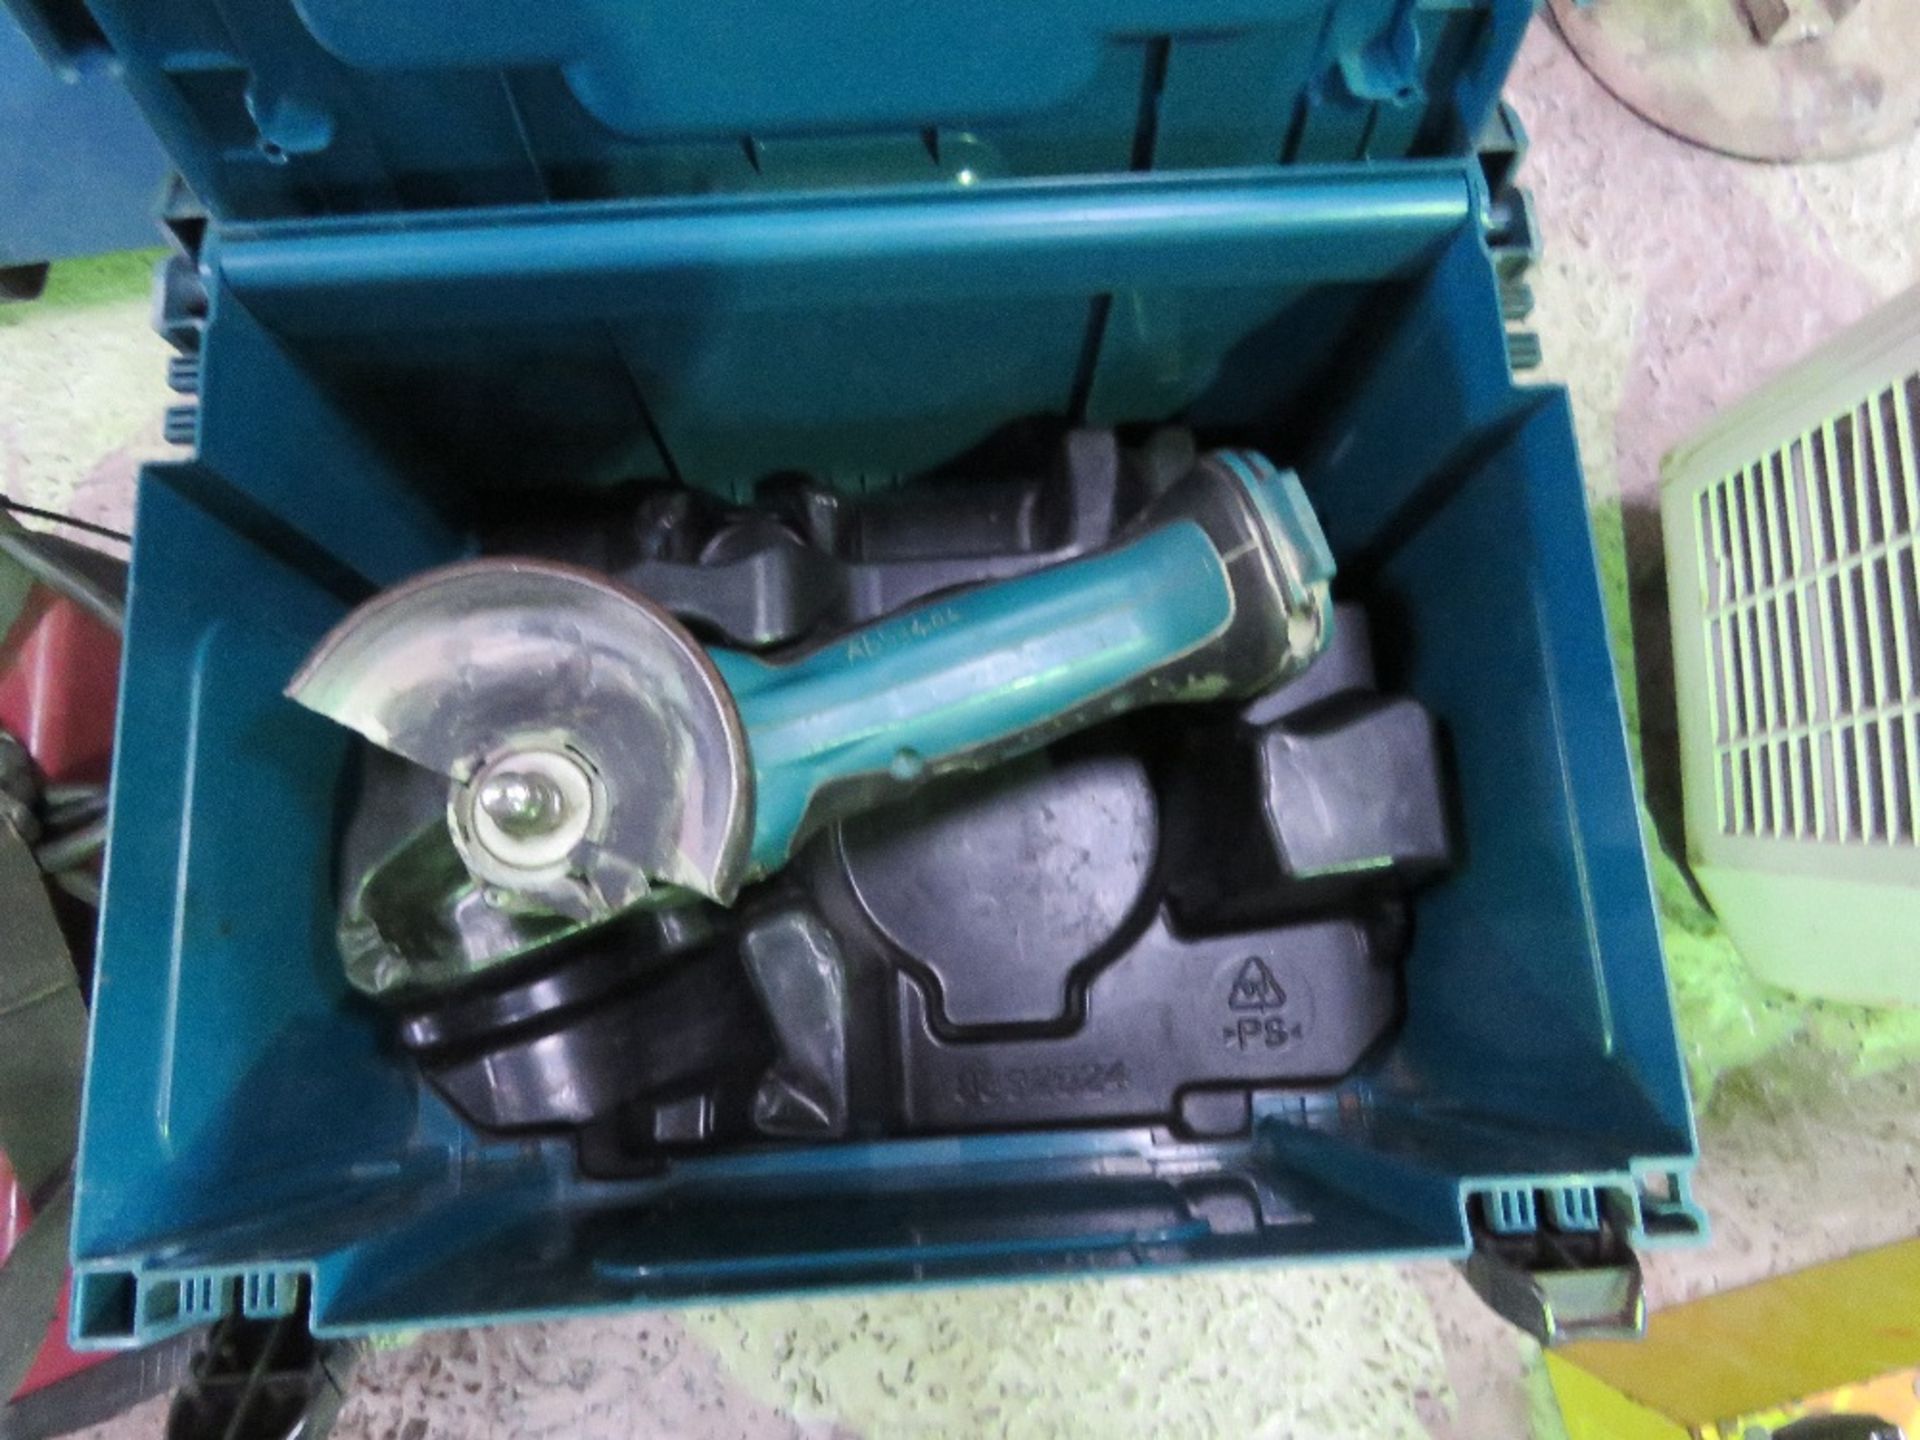 2 X MAKITA BOXED TOOLS: BATTERY NUT GUN AND GRINDER, NO BATTERIES/CHARGERS. - Image 2 of 4